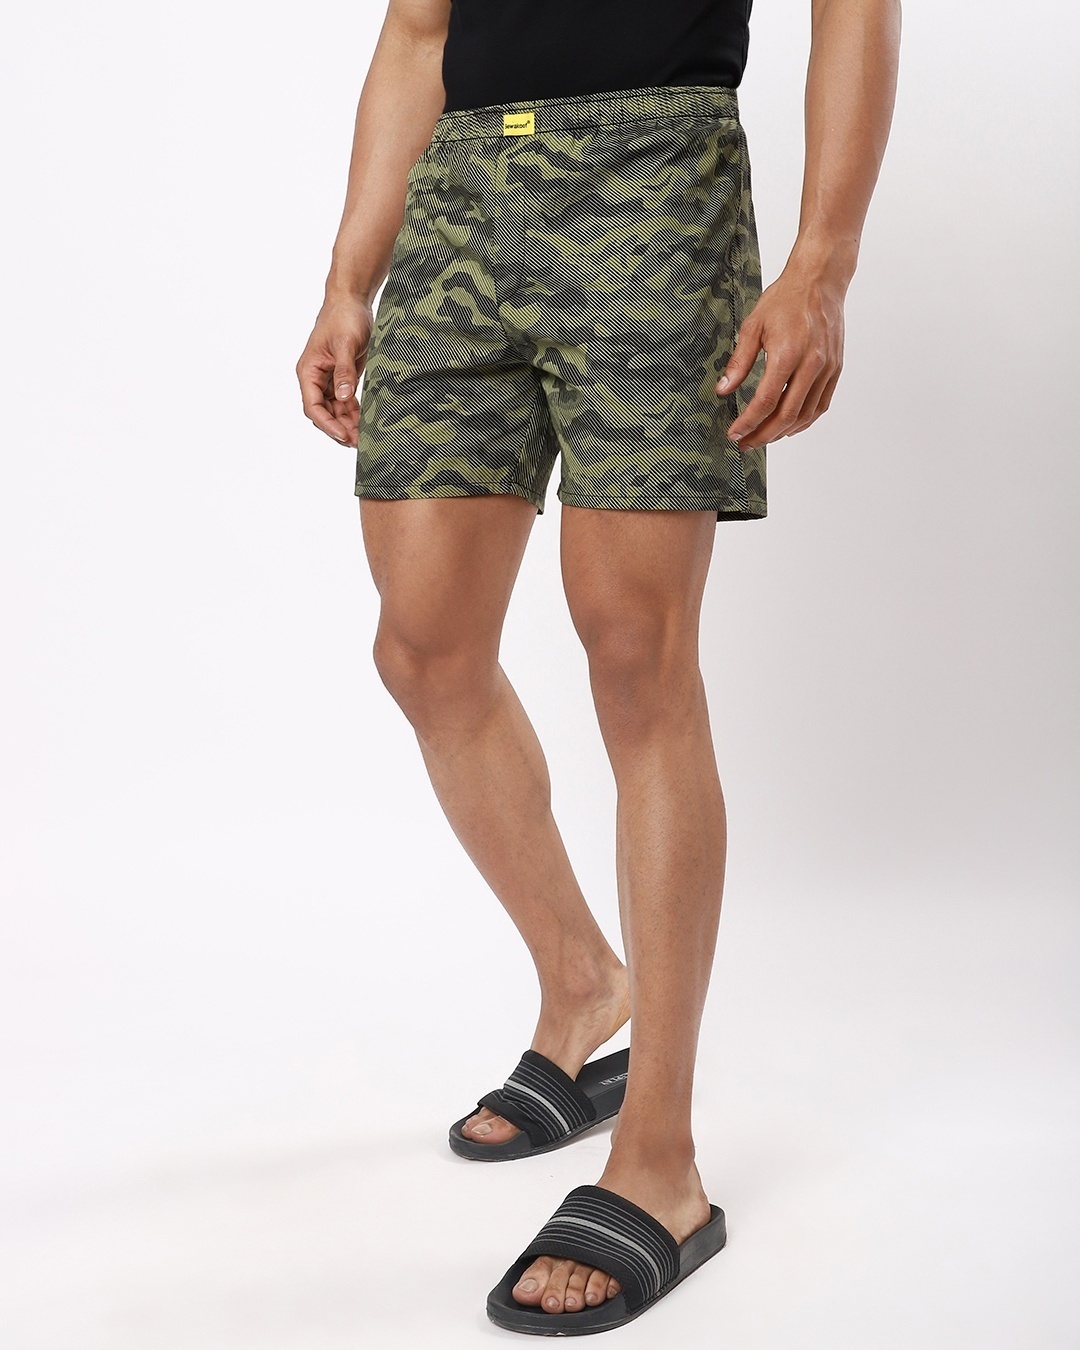 Shop Classic Camo All Over Printed Boxer-Back